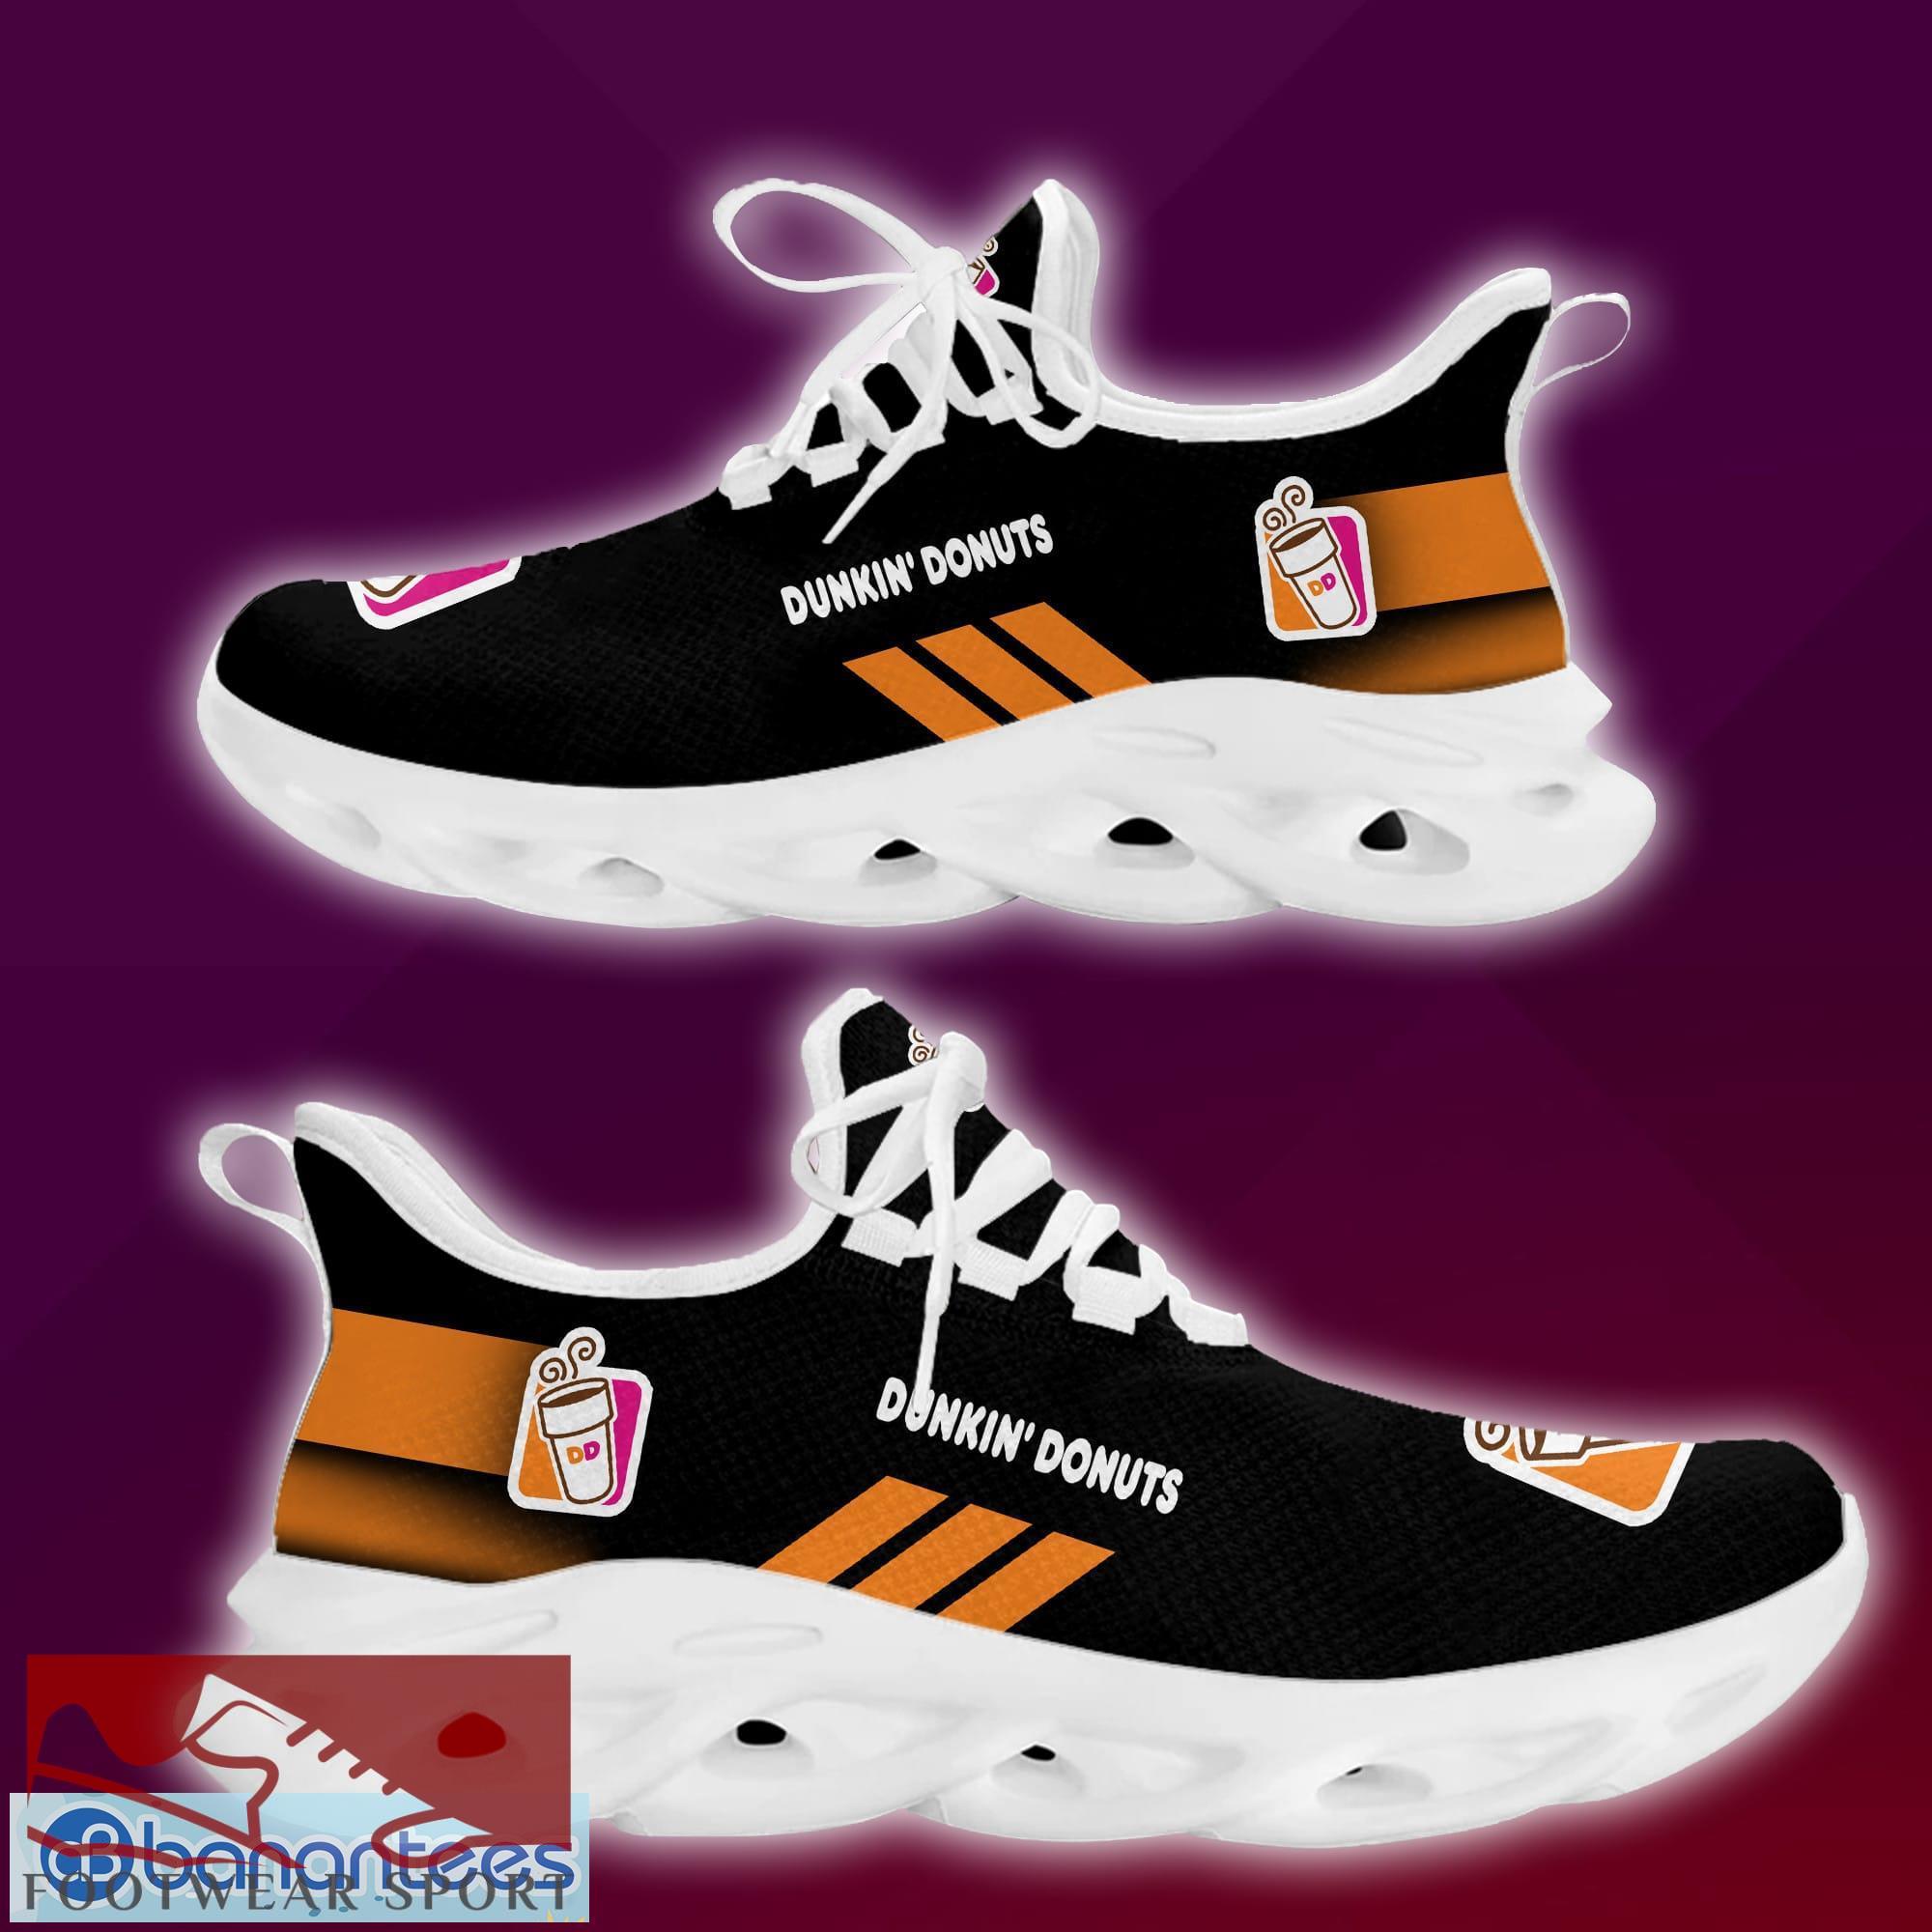 DUNKIN’ DONUTS Brand New Logo Max Soul Sneakers Dynamic Sport Shoes Gift - DUNKIN’ DONUTS New Brand Chunky Shoes Style Max Soul Sneakers Photo 2